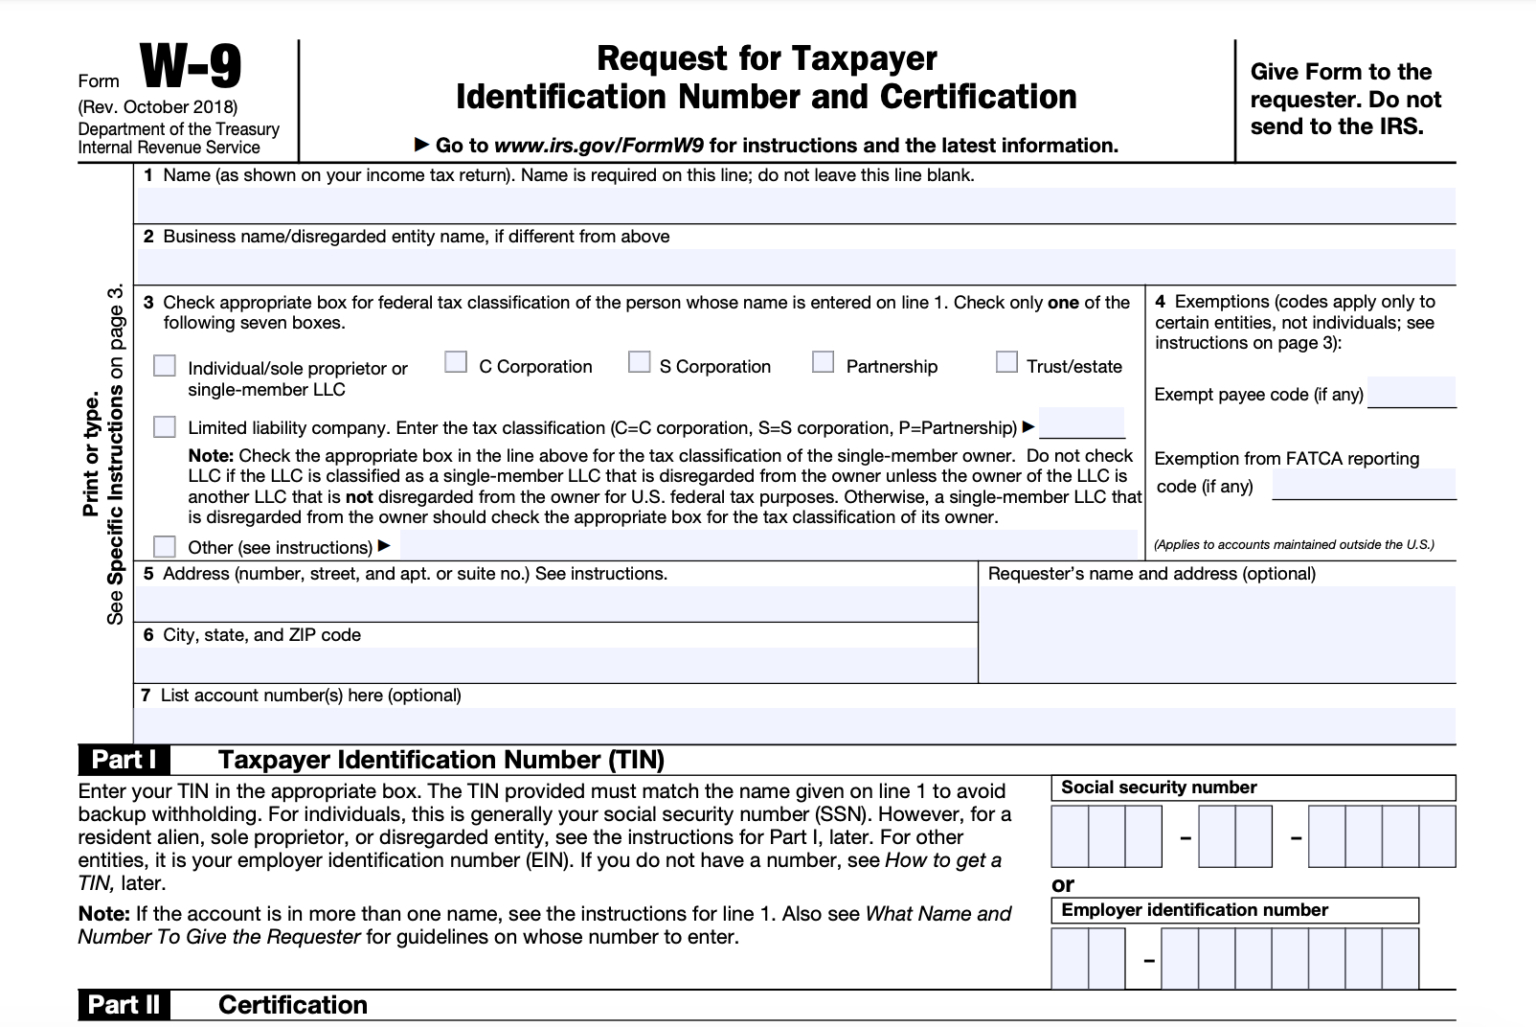 W-9 Form - Fill Out The Irs W-9 Form Online For 2019